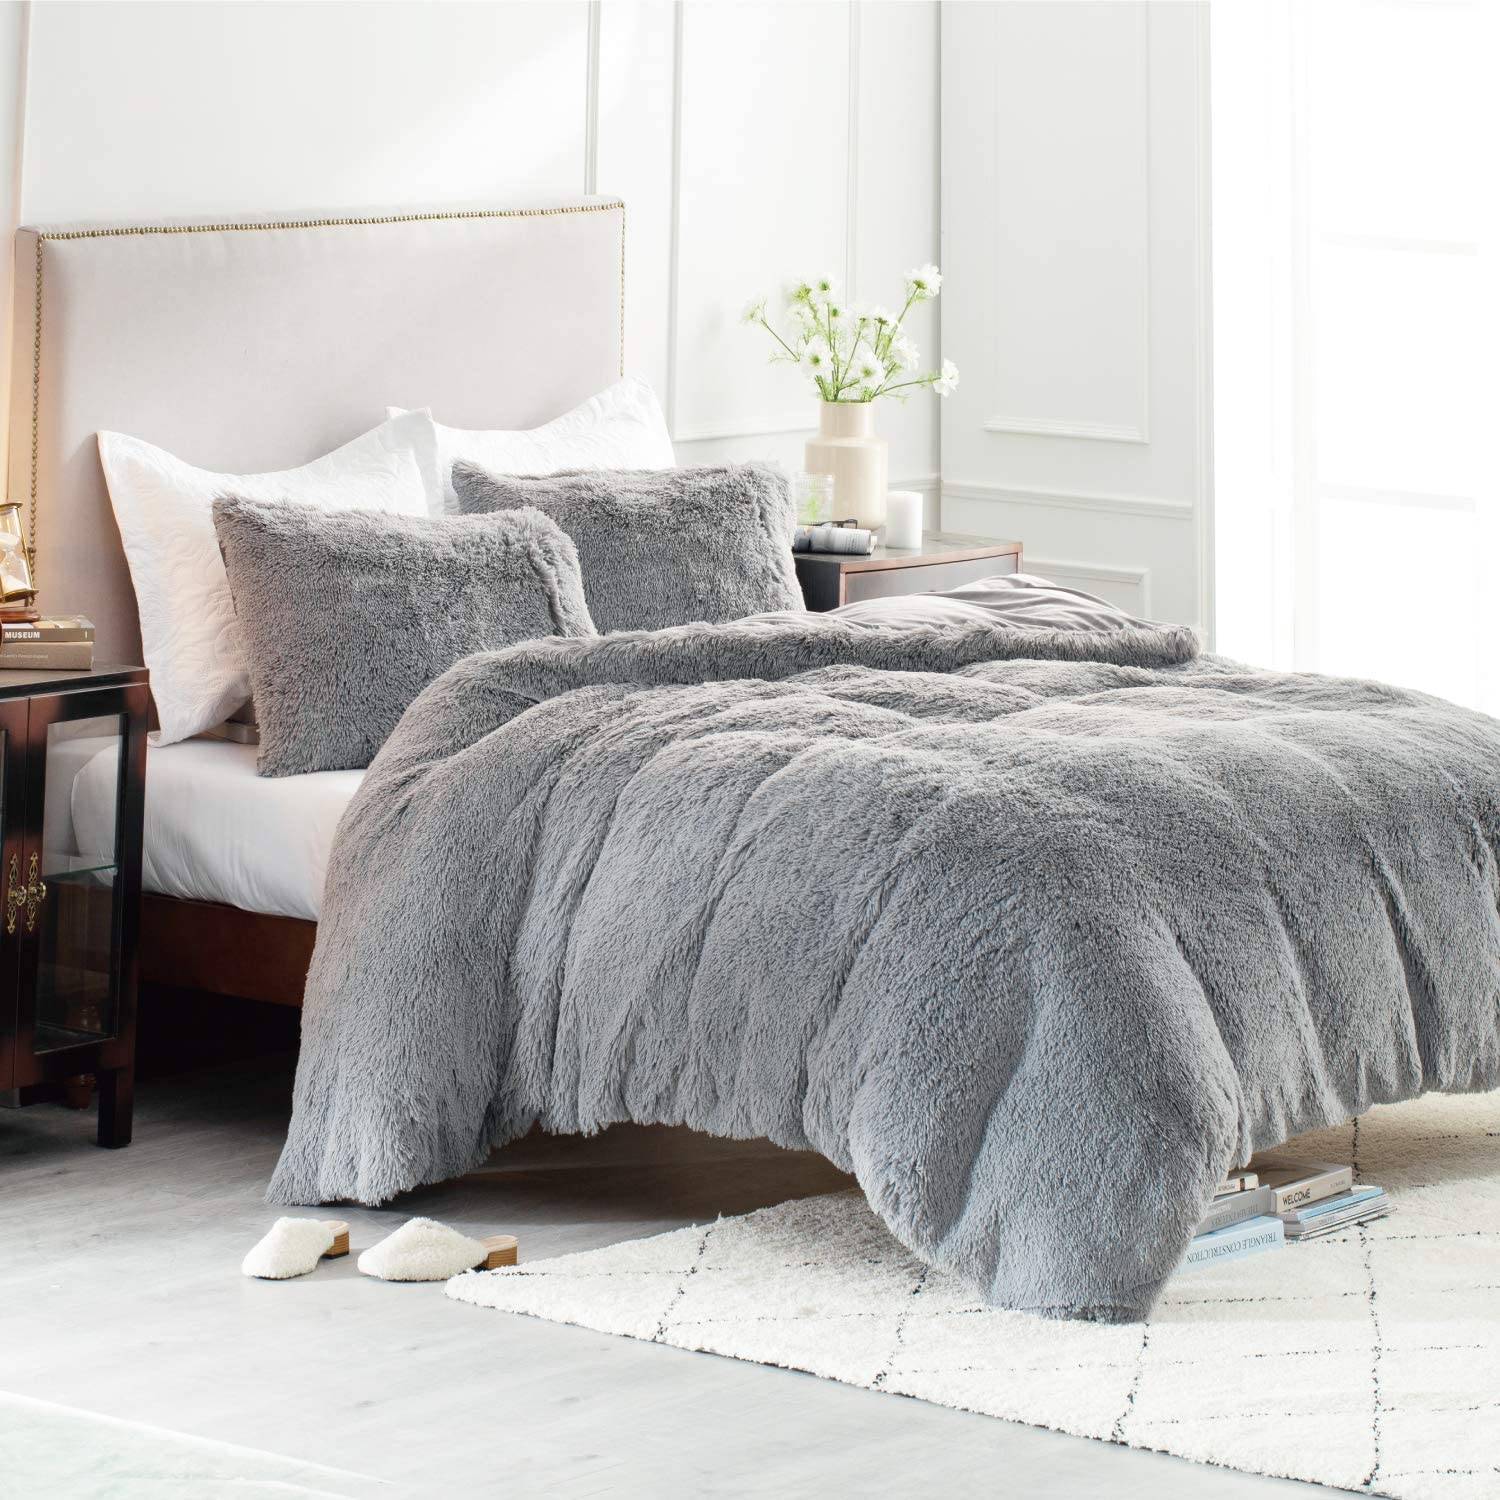 Bedsure Fluffy Duvet Cover Set Full/Queen Size (90x90 Inches) - Luxury